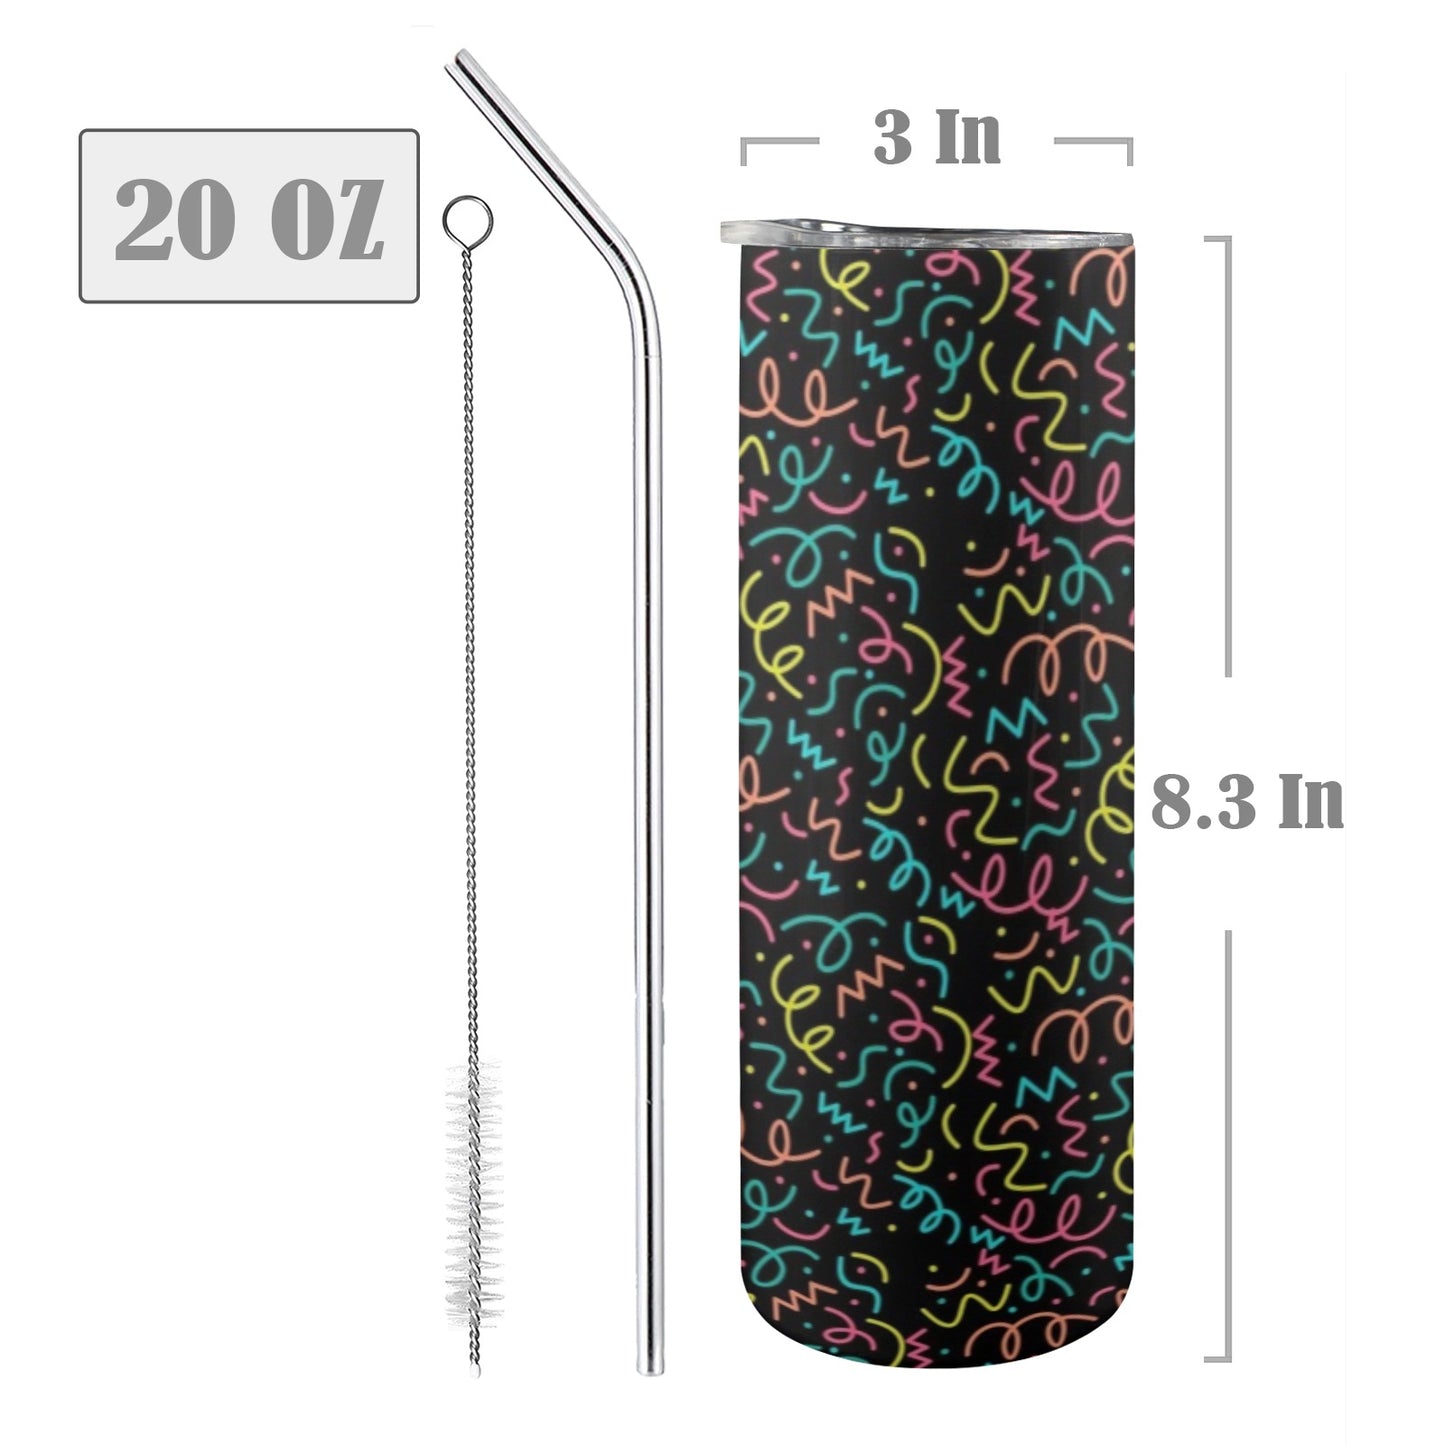 Squiggle Time - 20oz Tall Skinny Tumbler with Lid and Straw 20oz Tall Skinny Tumbler with Lid and Straw